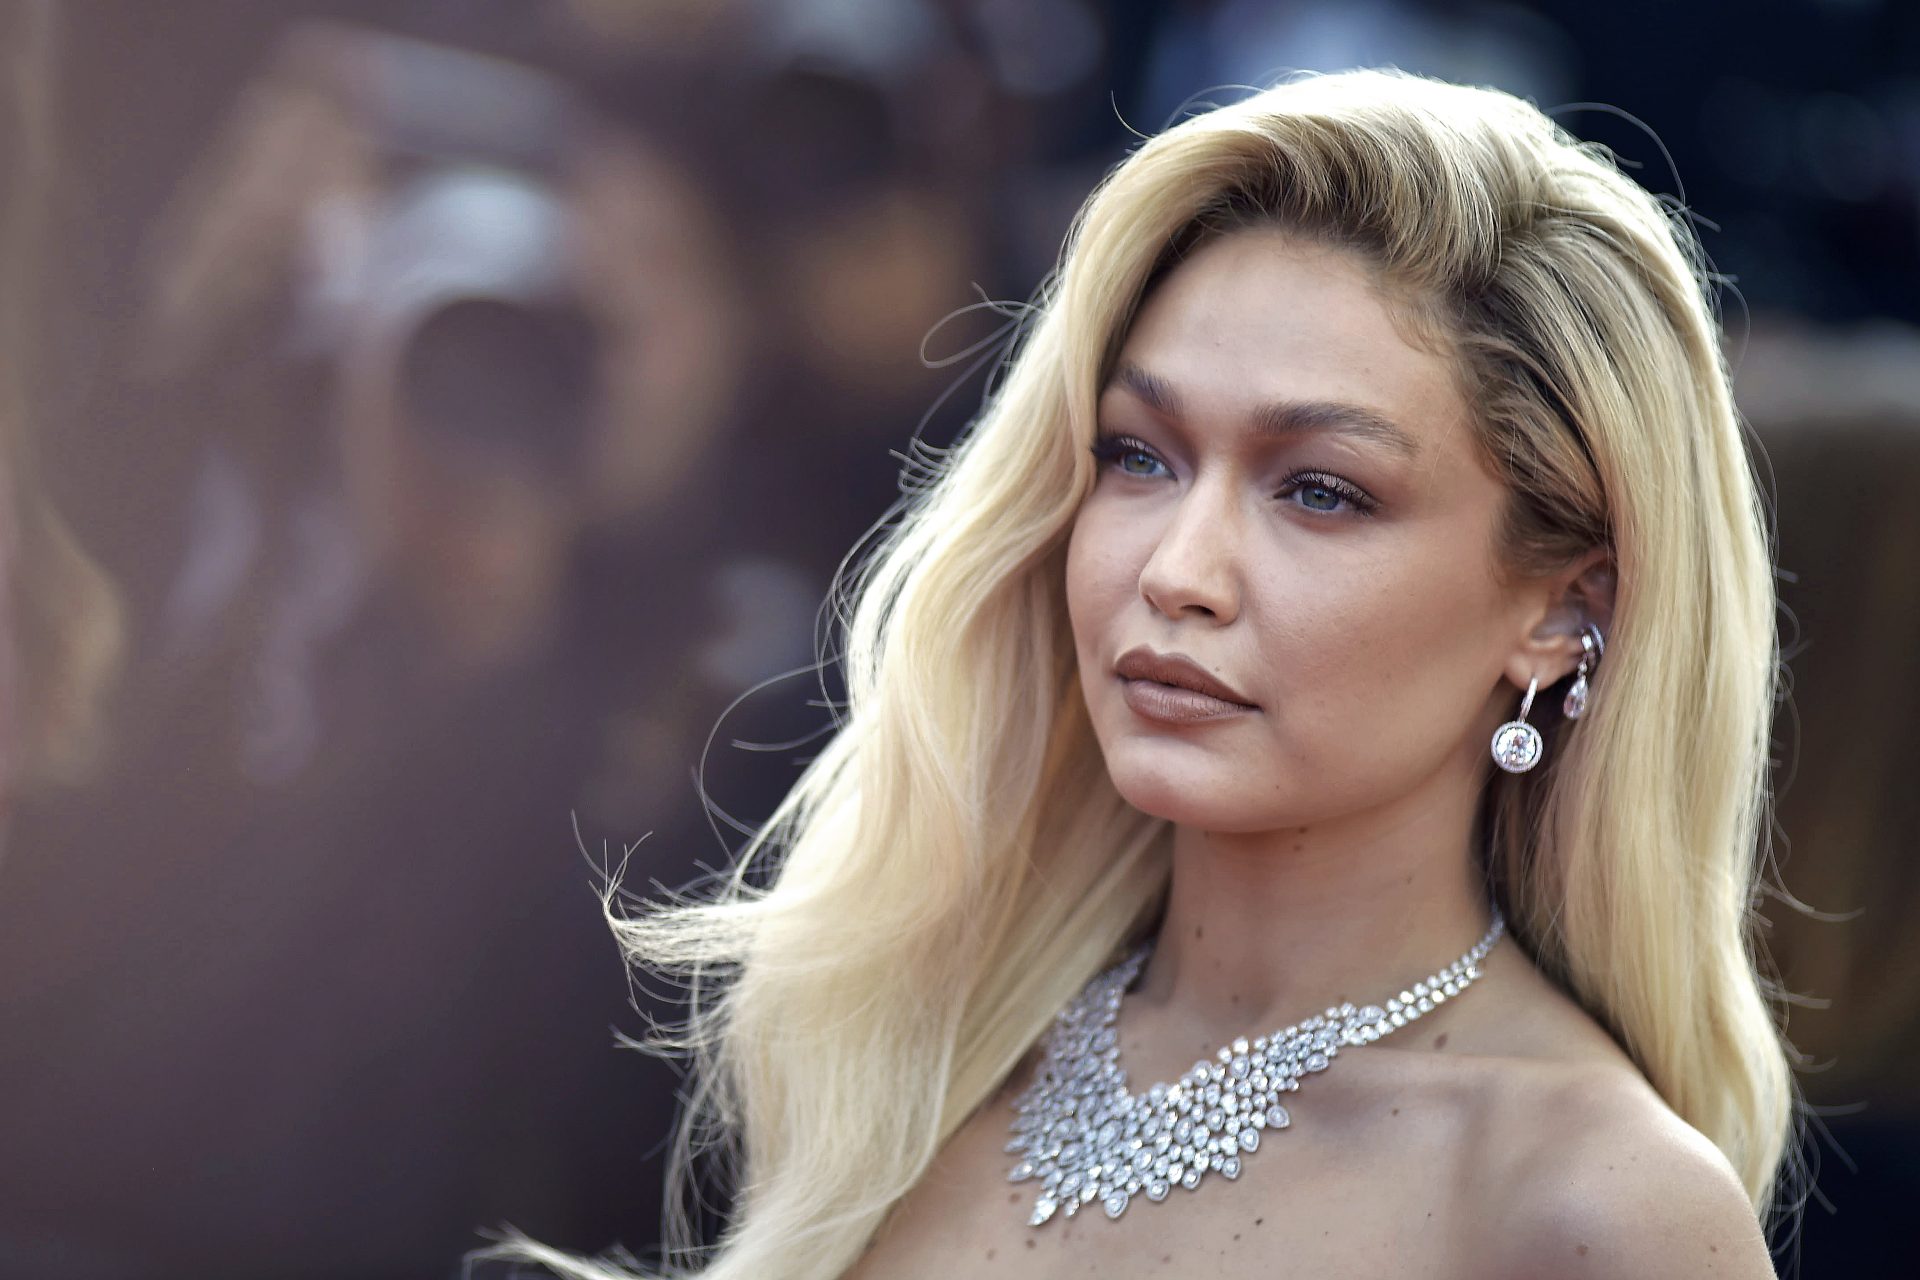 Gigi Hadid: She supports the Palestinian cause, but not violence 